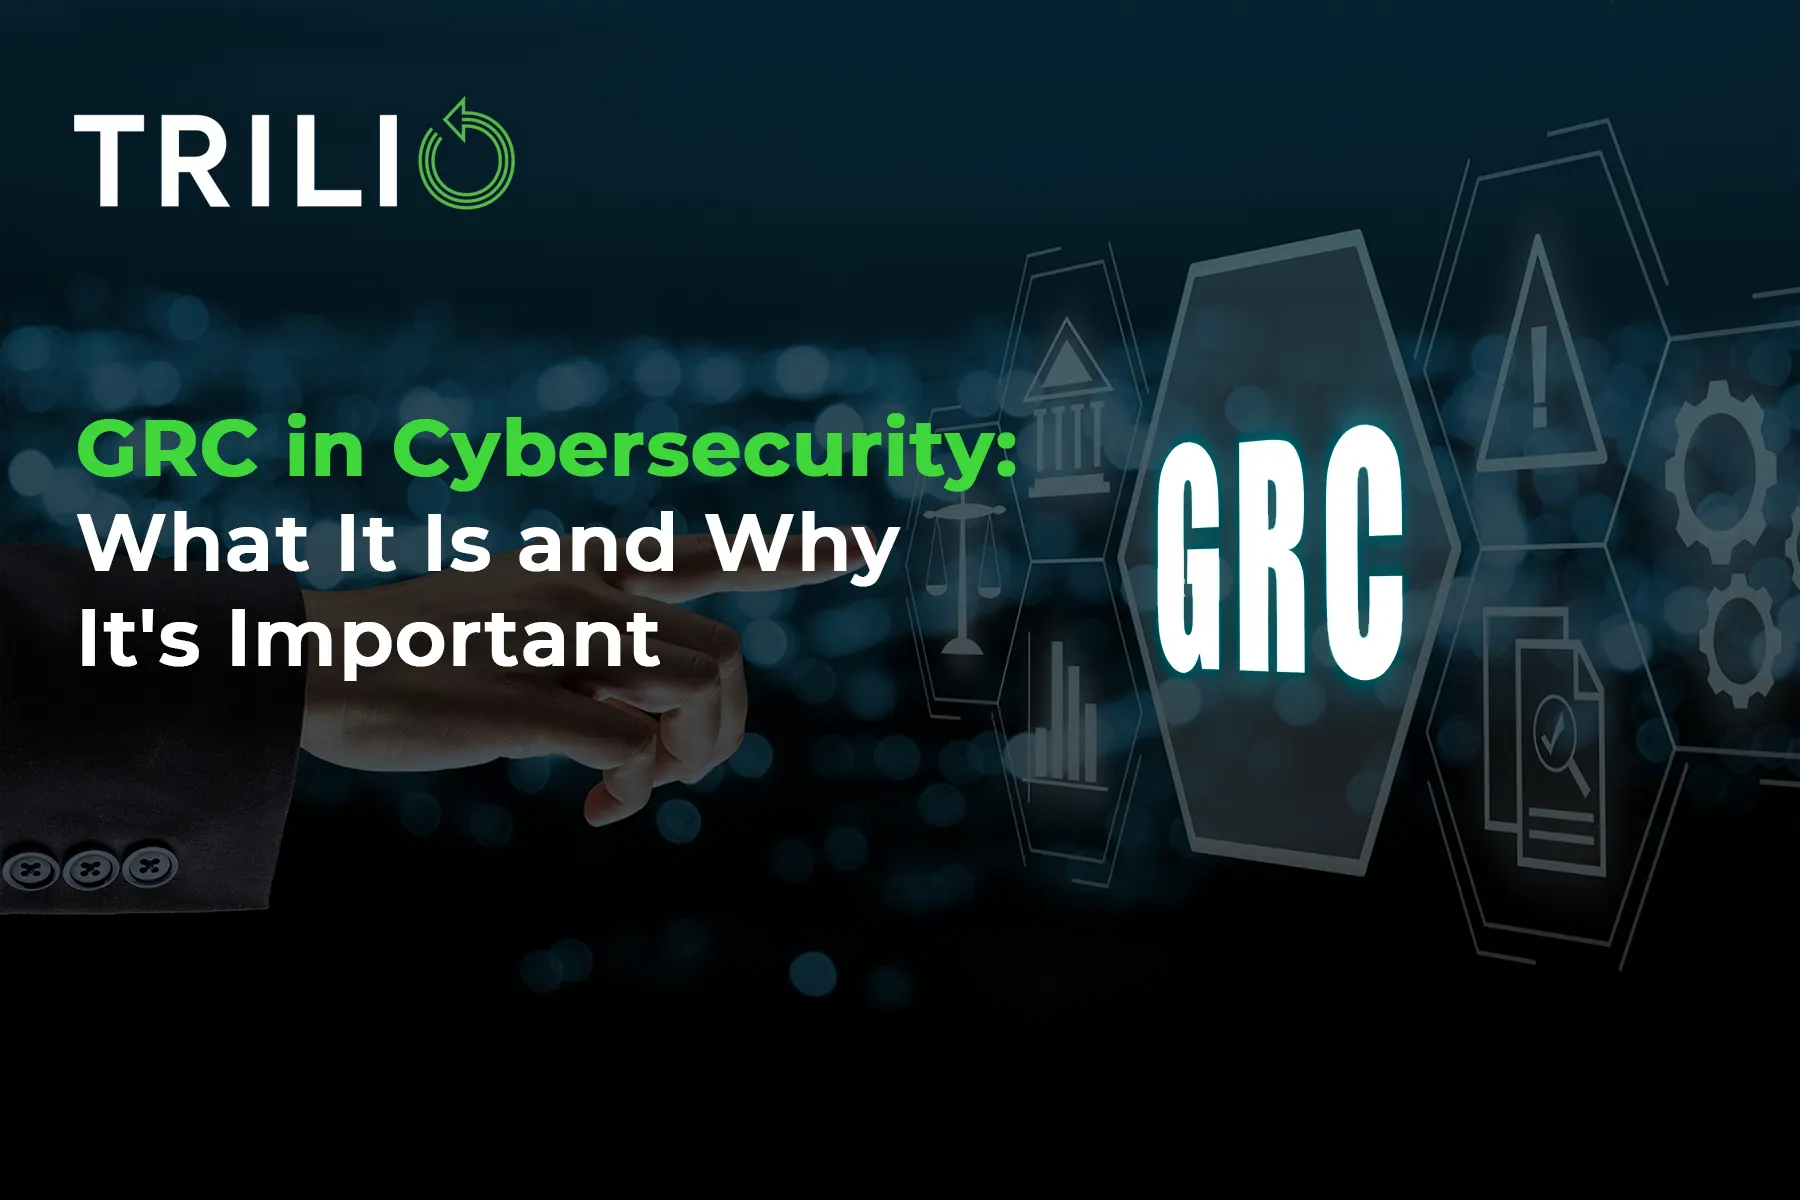 GRC in Cybersecurity: What It Is and Why It's Important